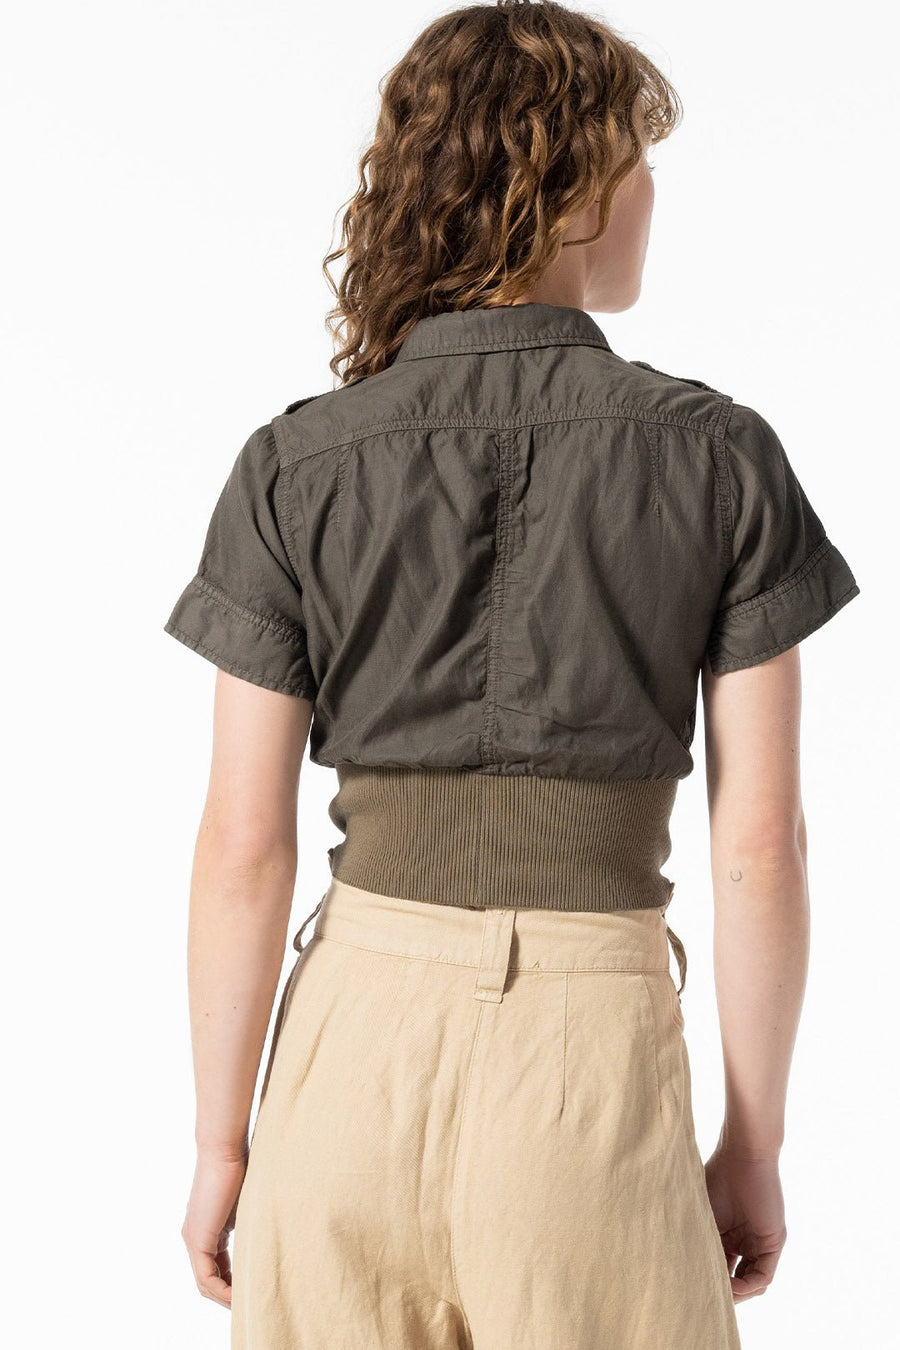 SERENGETI SHORT SLEEVE BUTTON DOWN TOP, ARMY - Burning Torch Online Boutique